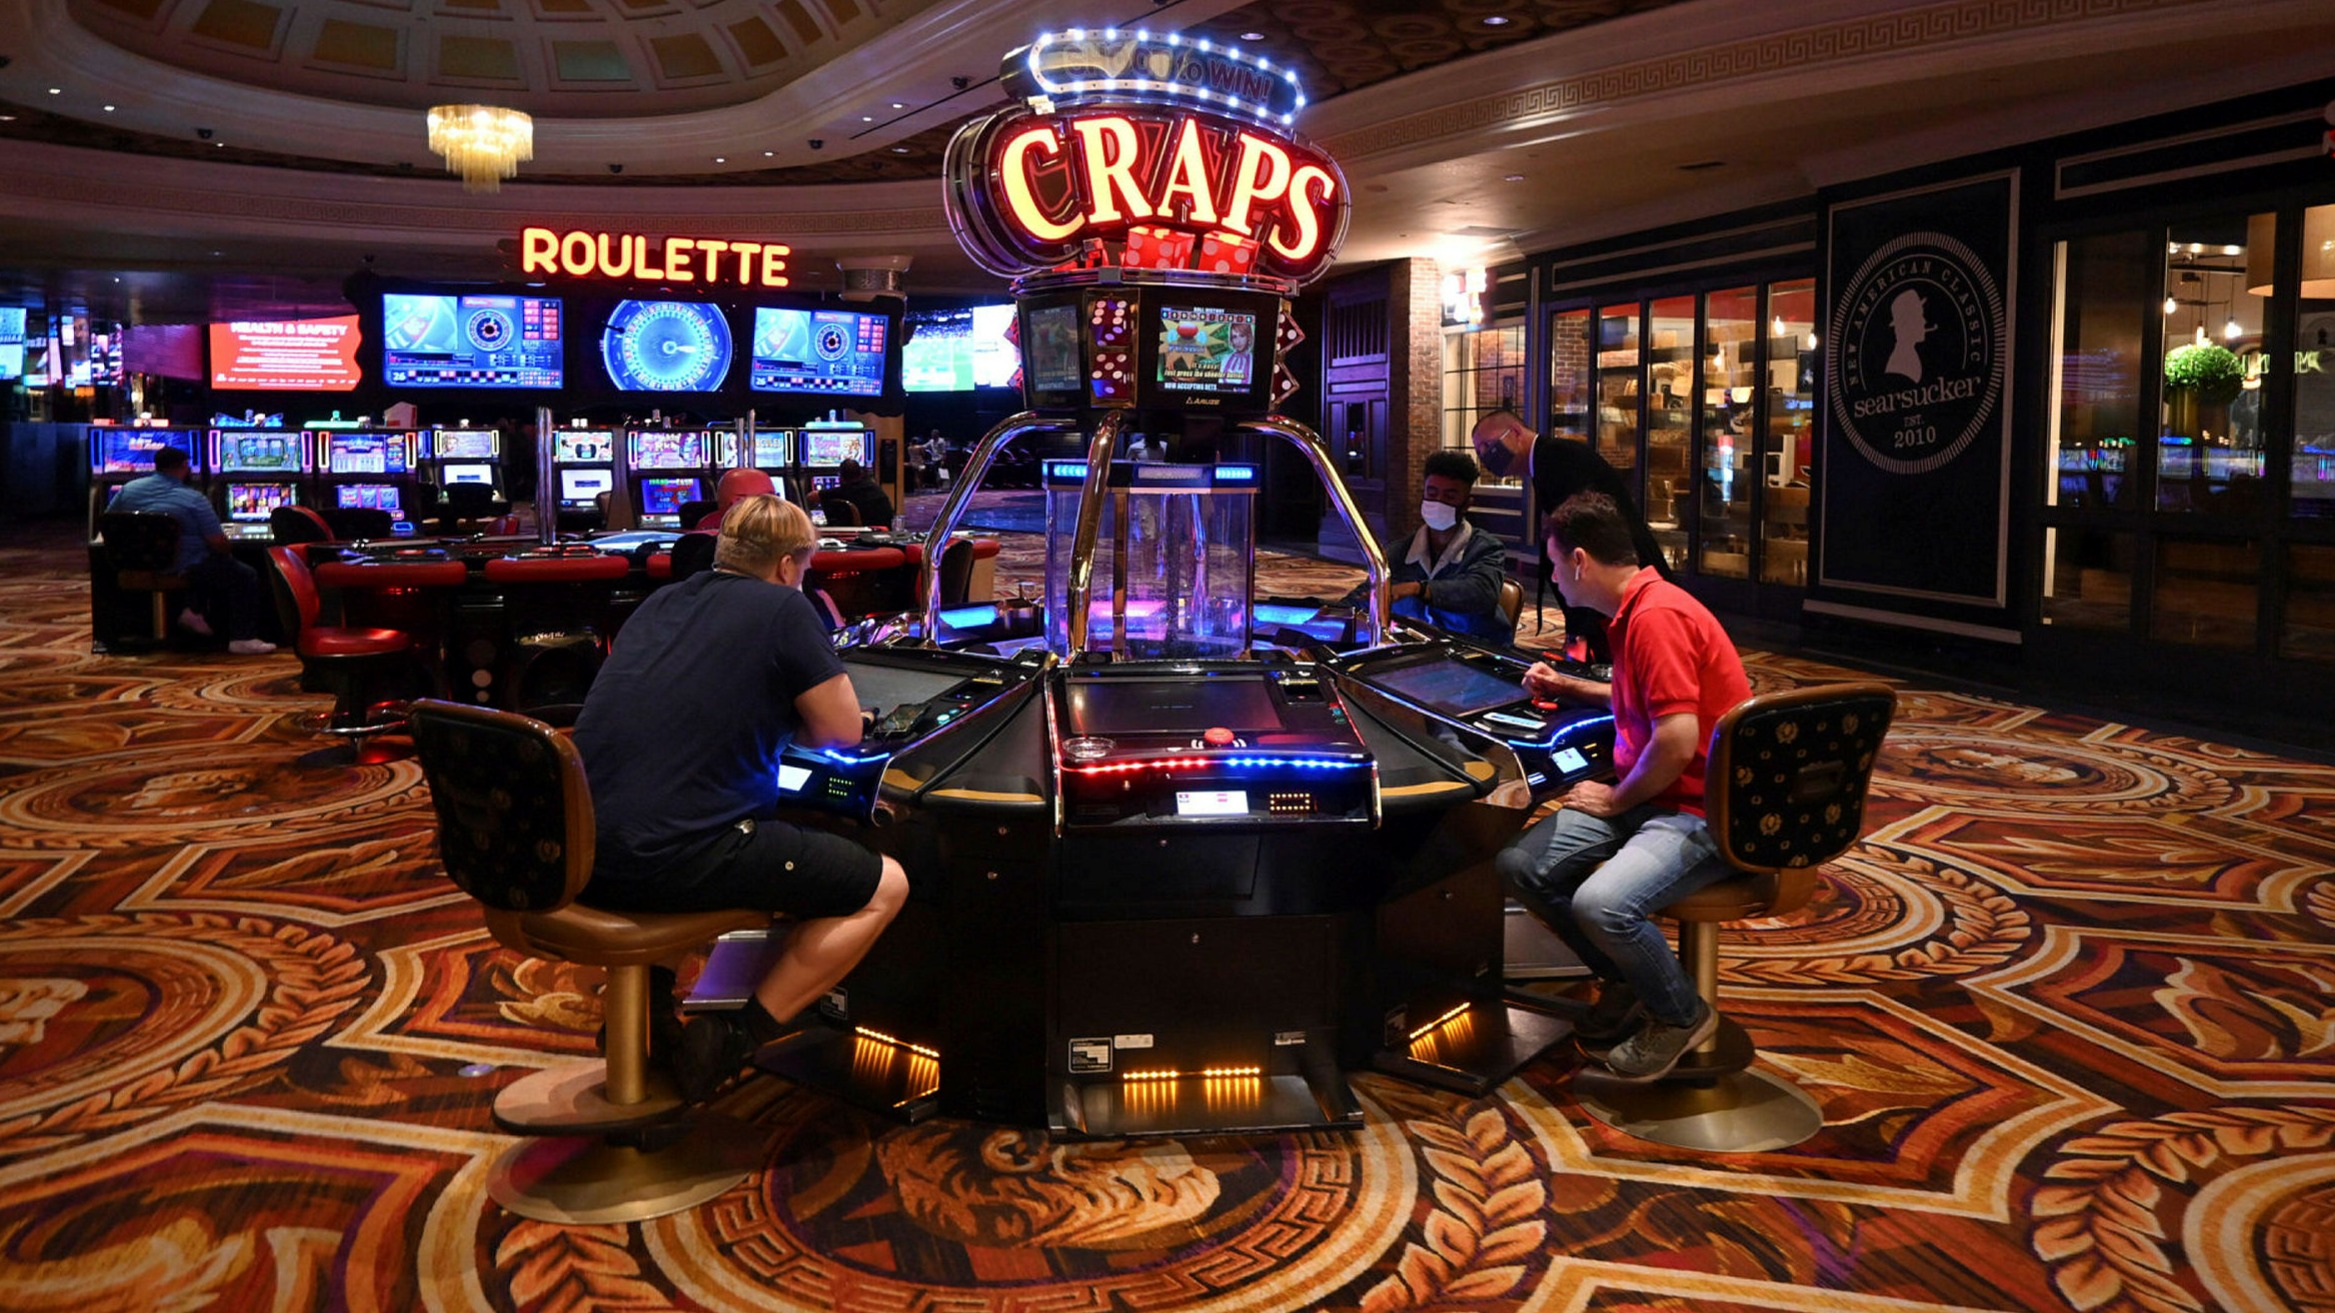 A cautionary Vegas casino tale of corporate gamblers | Financial Times